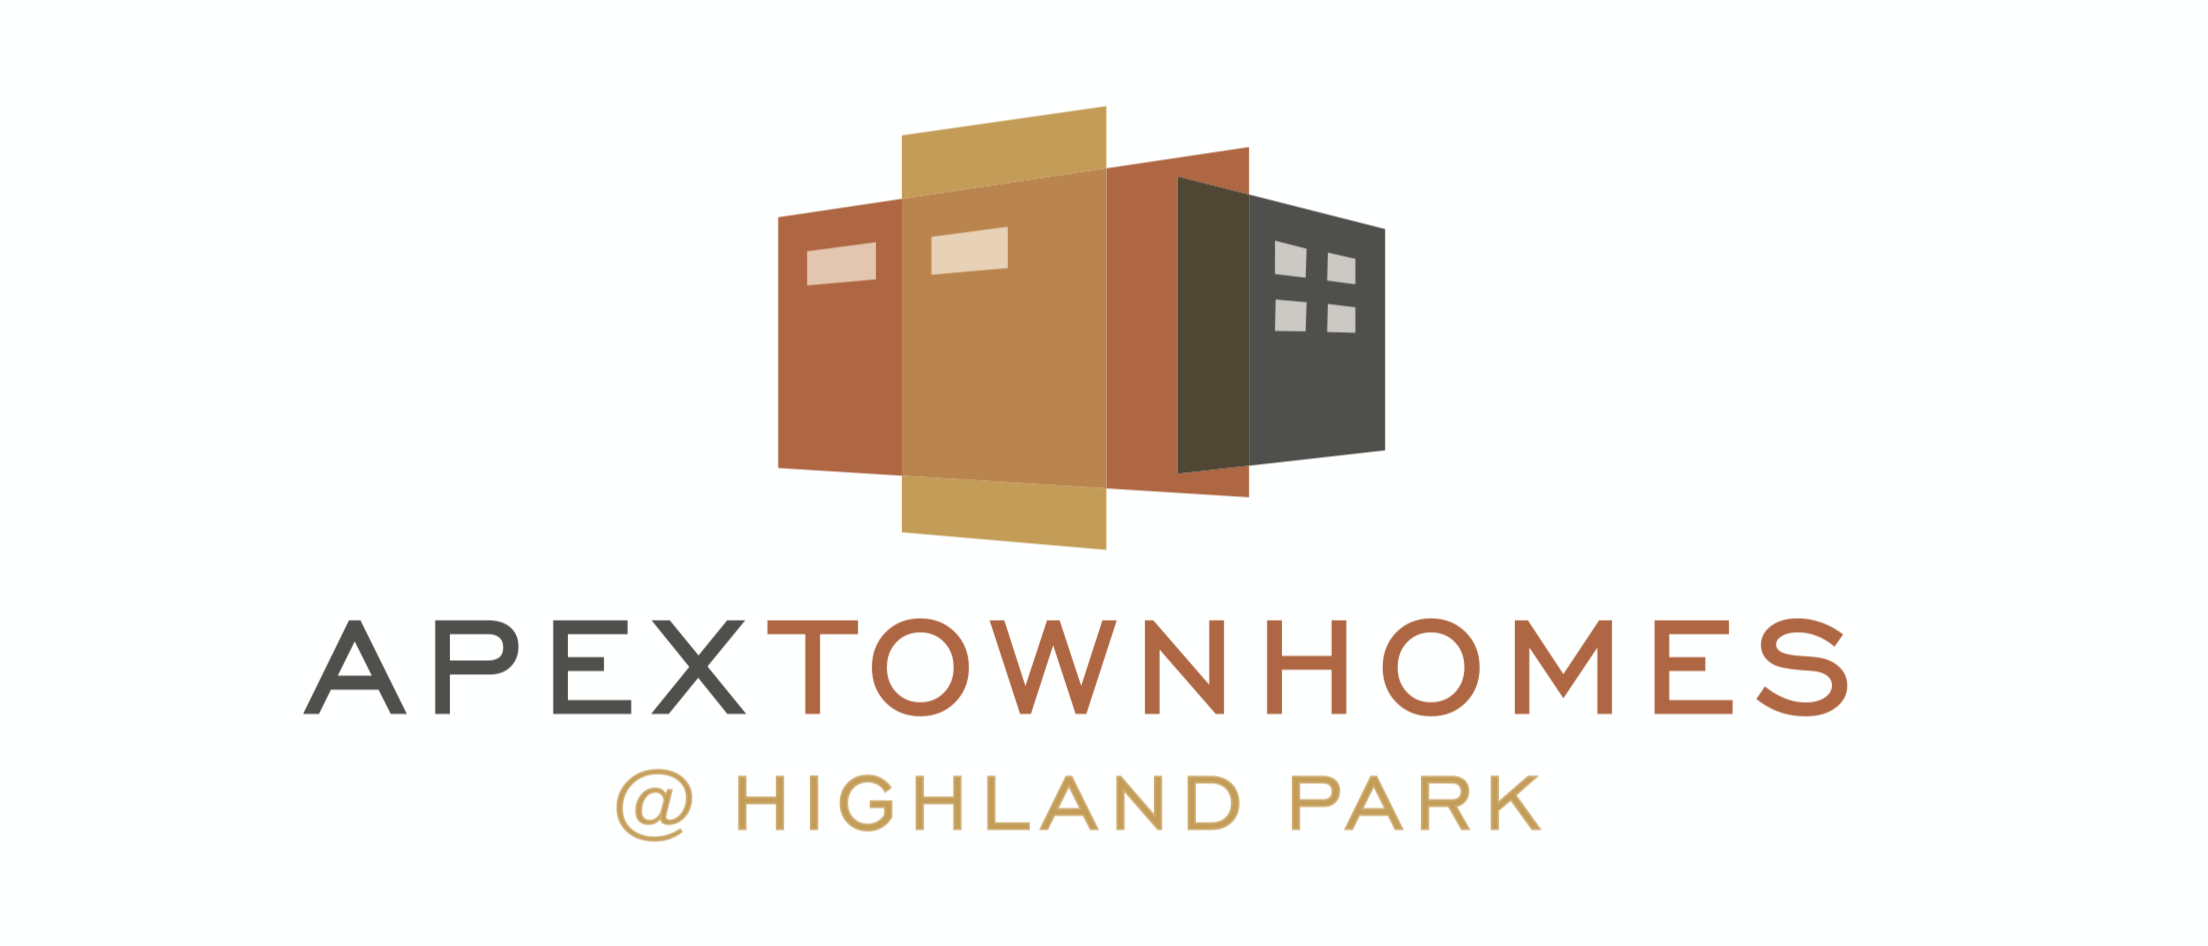 Apex Townhomes at Highland Park